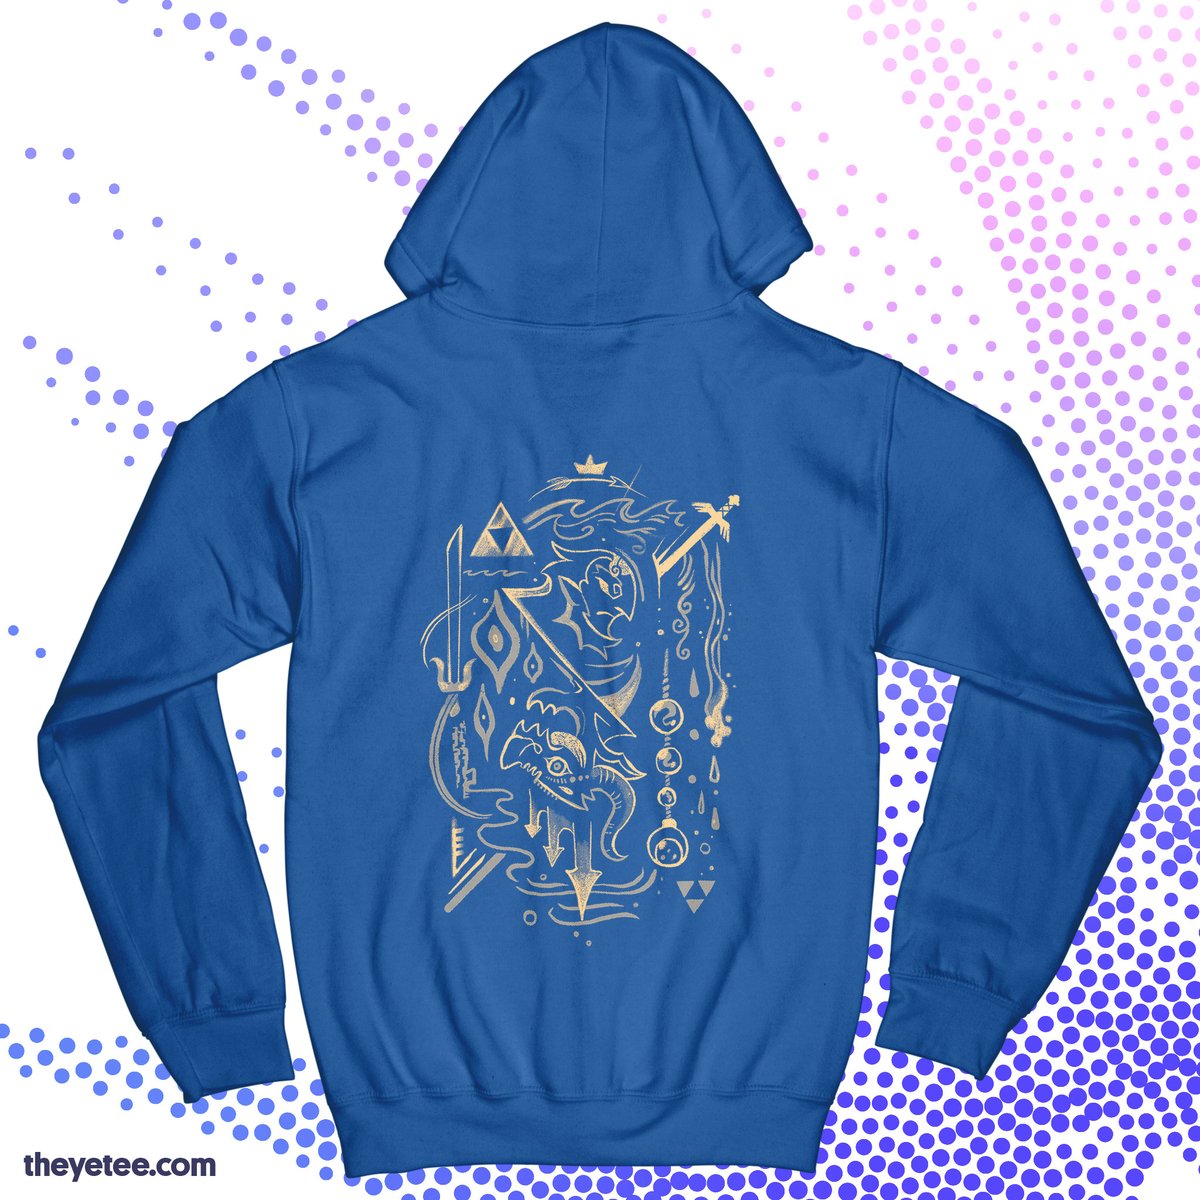 「This kingdom needs a new king like we ne」|The Yetee 🌈のイラスト